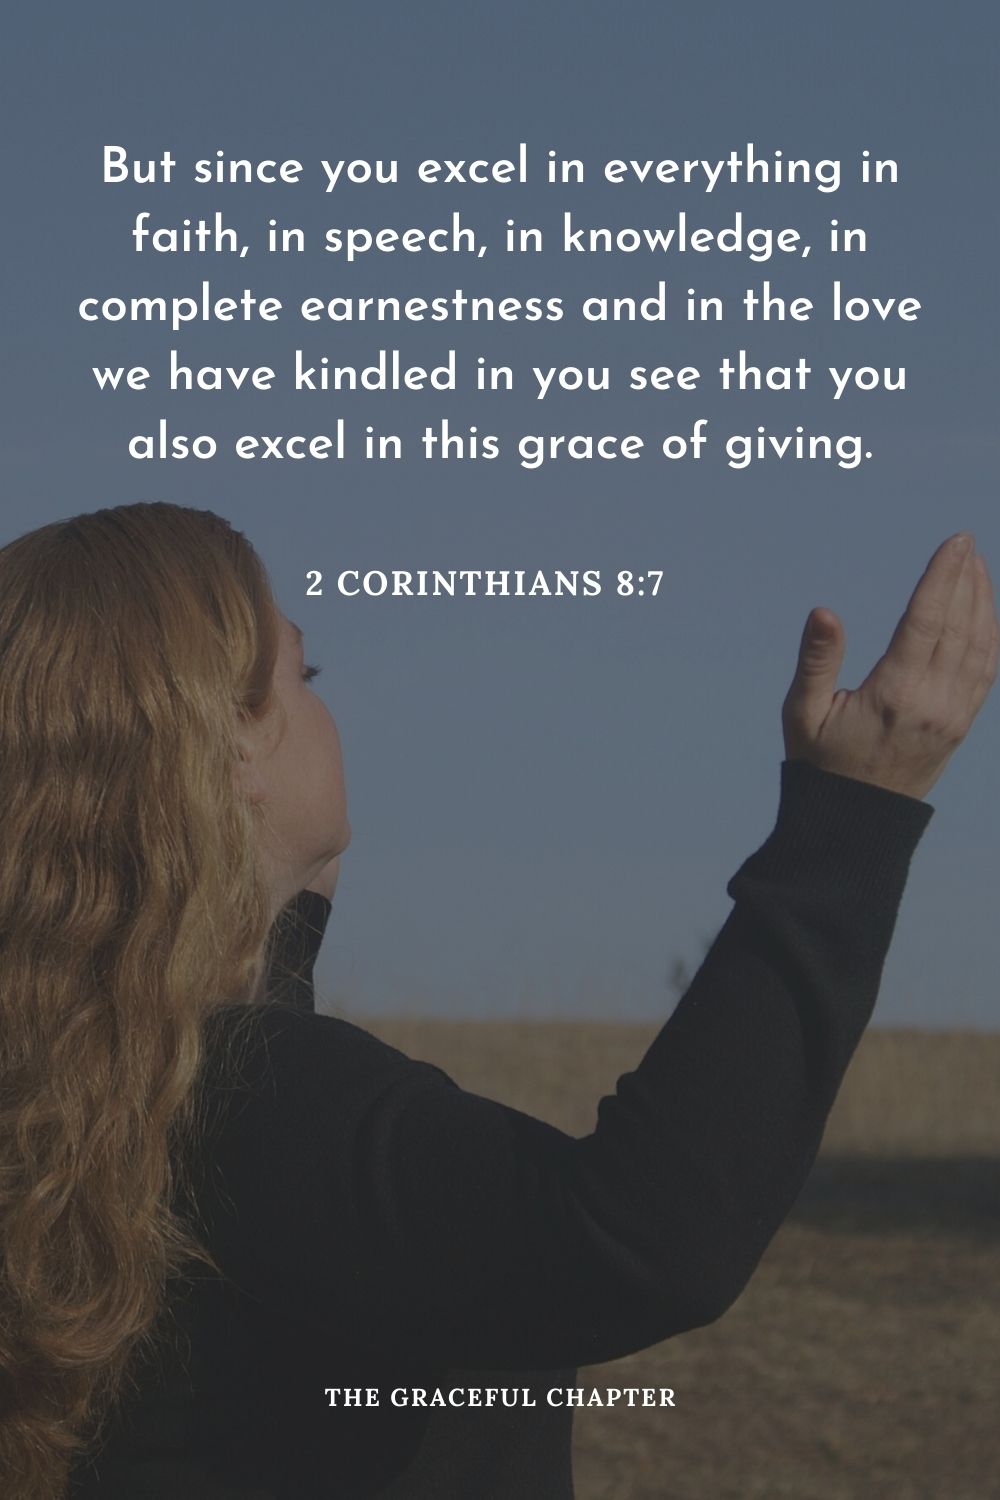 But since you excel in everything in faith, in speech, in knowledge, in complete earnestness and in the love we have kindled in you see that you also excel in this grace of giving.